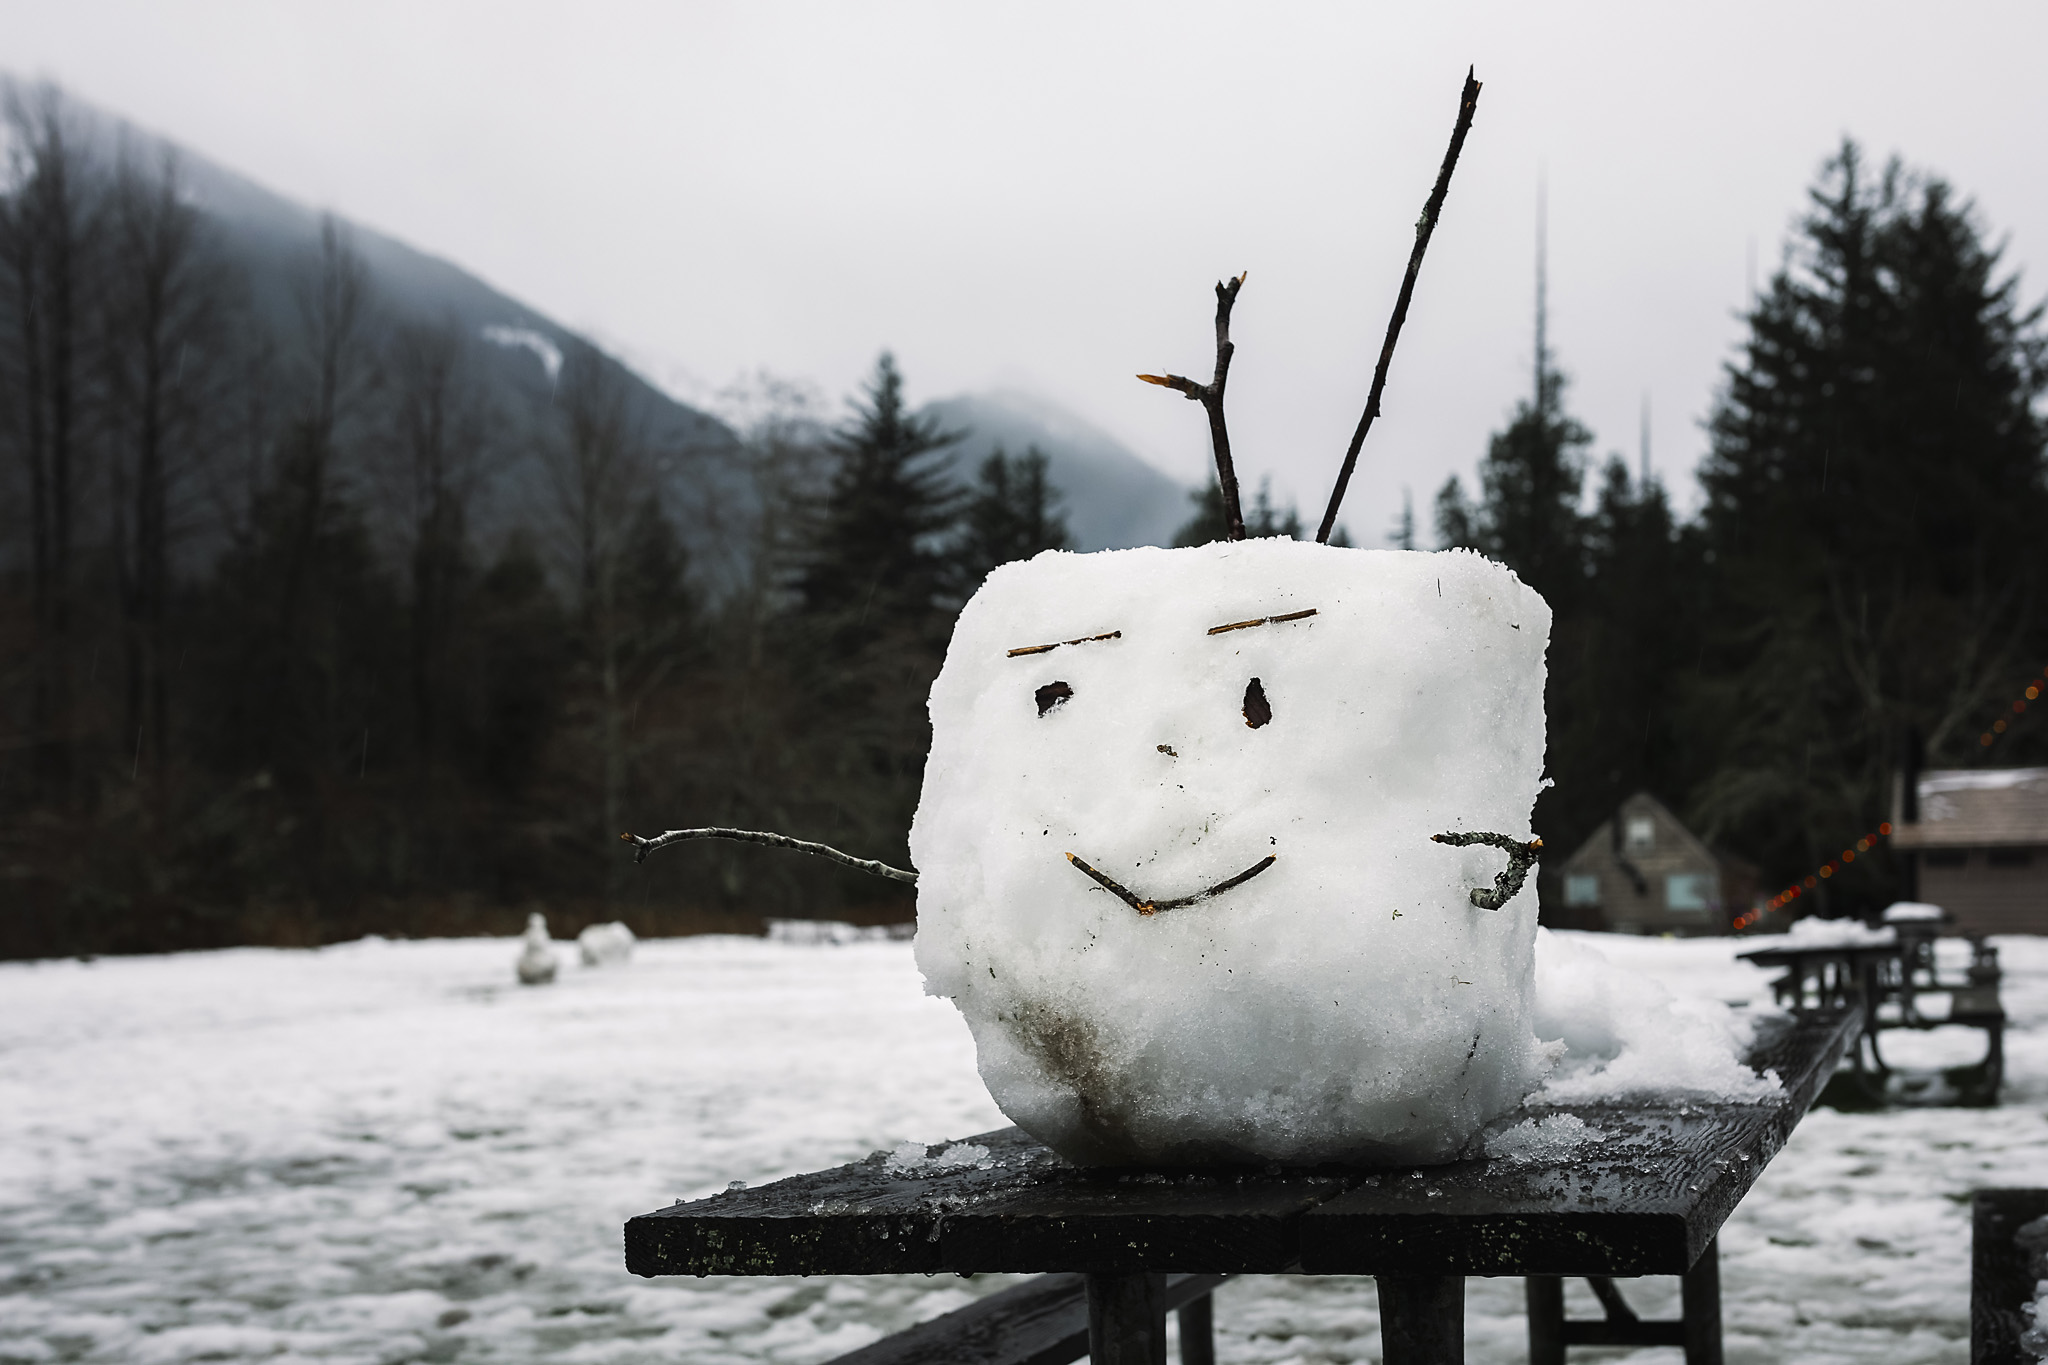 The power of positive thought - snow man cube